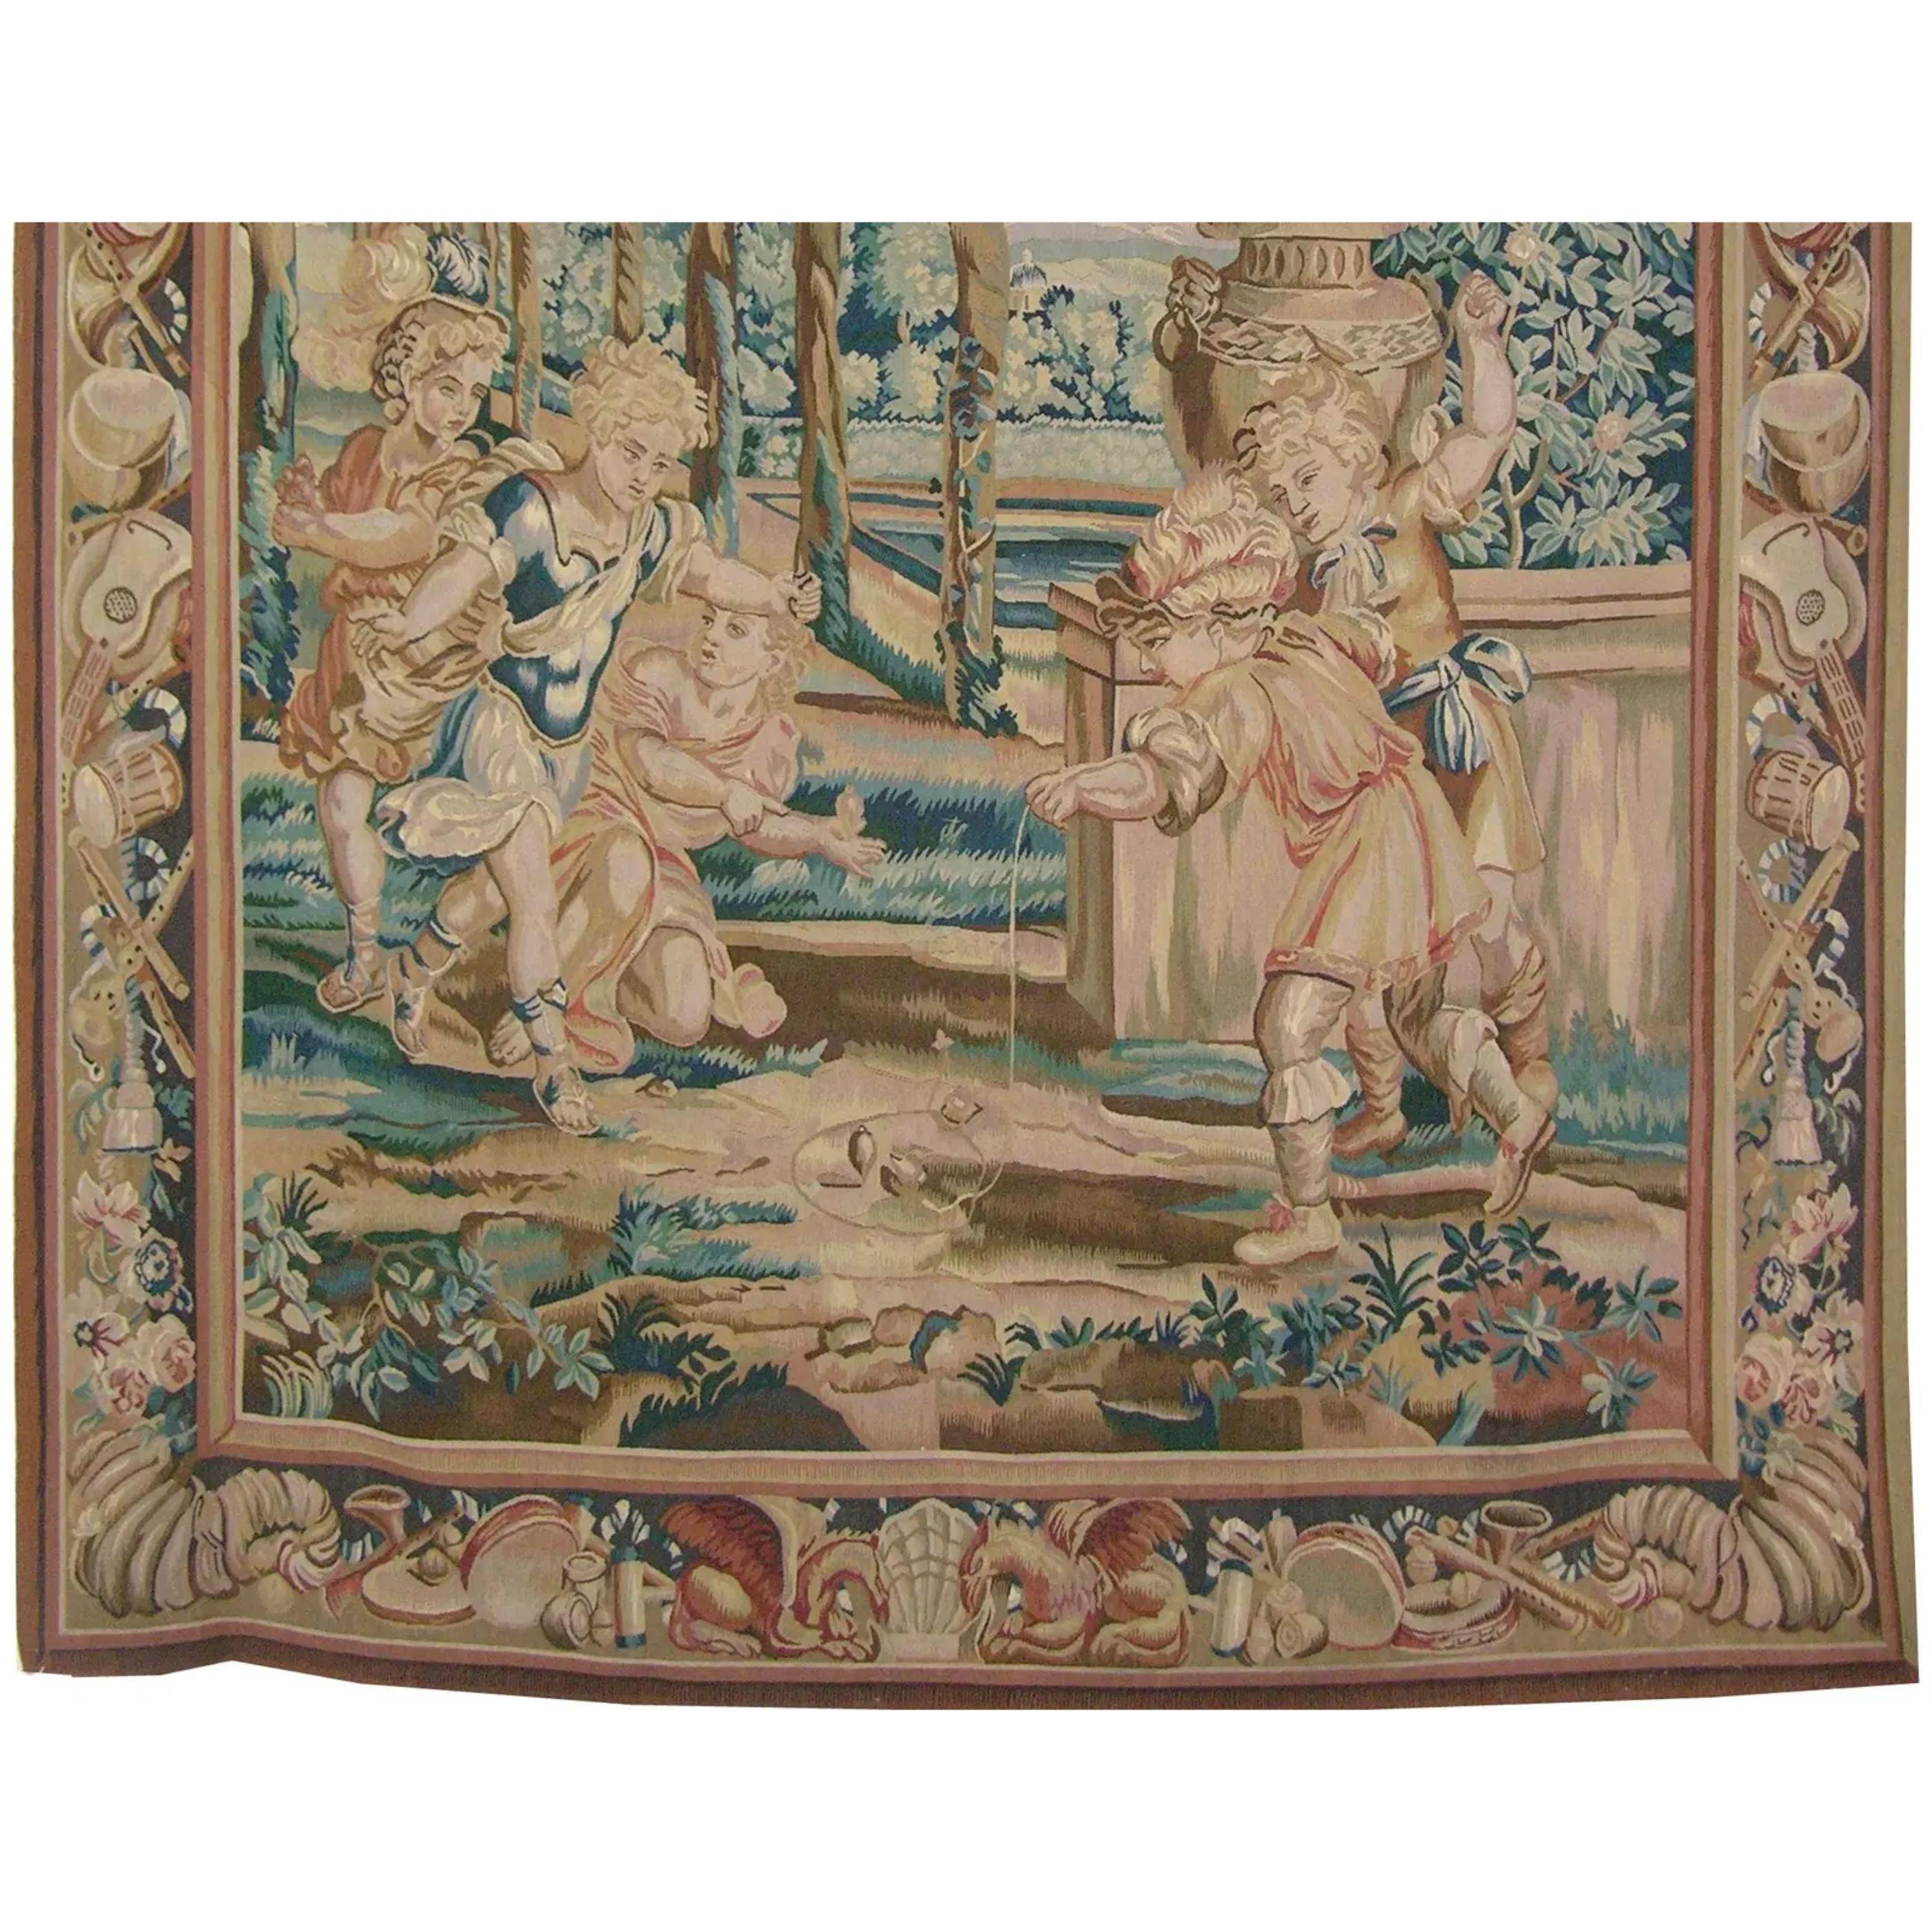 Unknown Vintage Tapestry Depicting Children at Play 10.3X7.4 For Sale